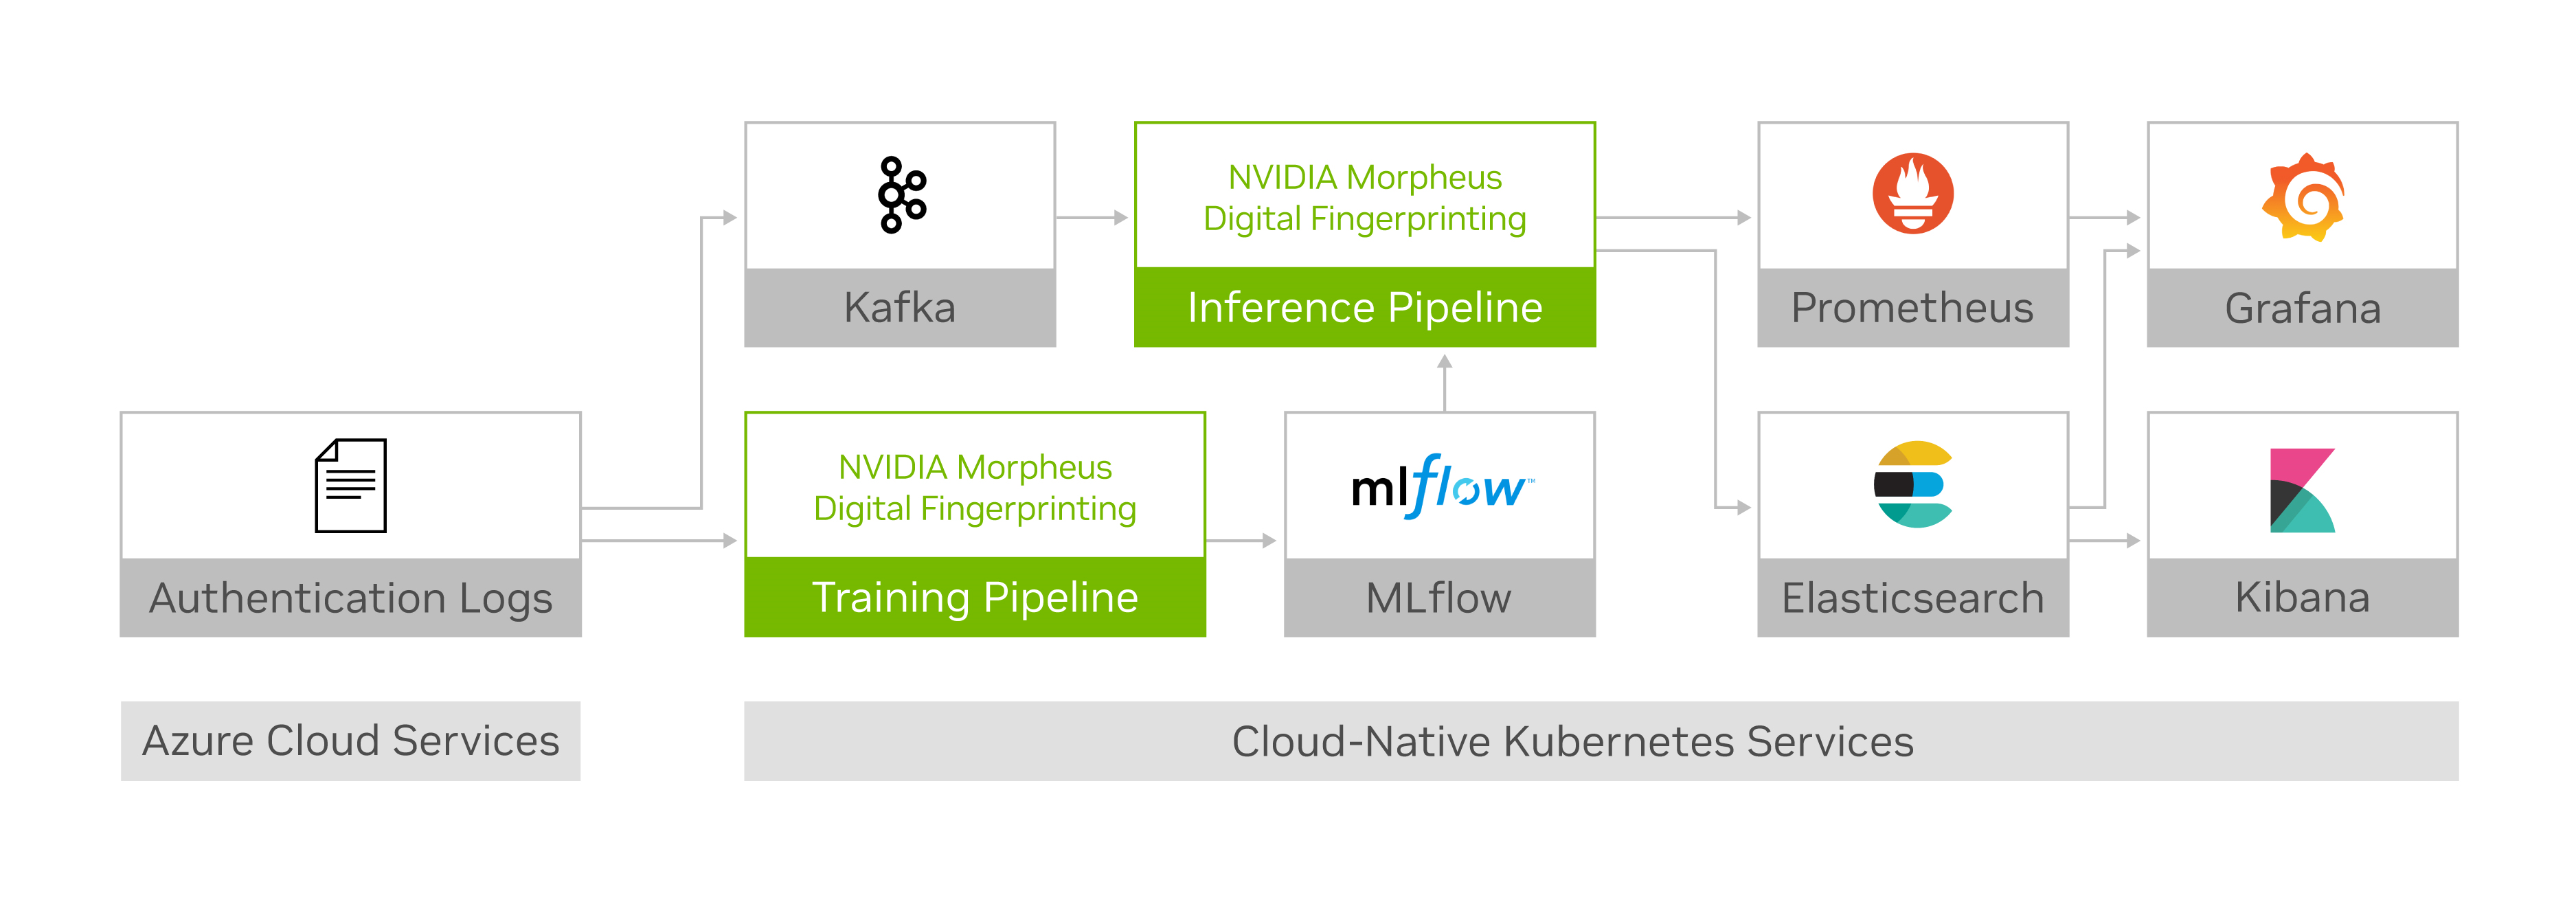 Diagram showing the components of the NVIDIA digital fingerprinting AI workflow.
